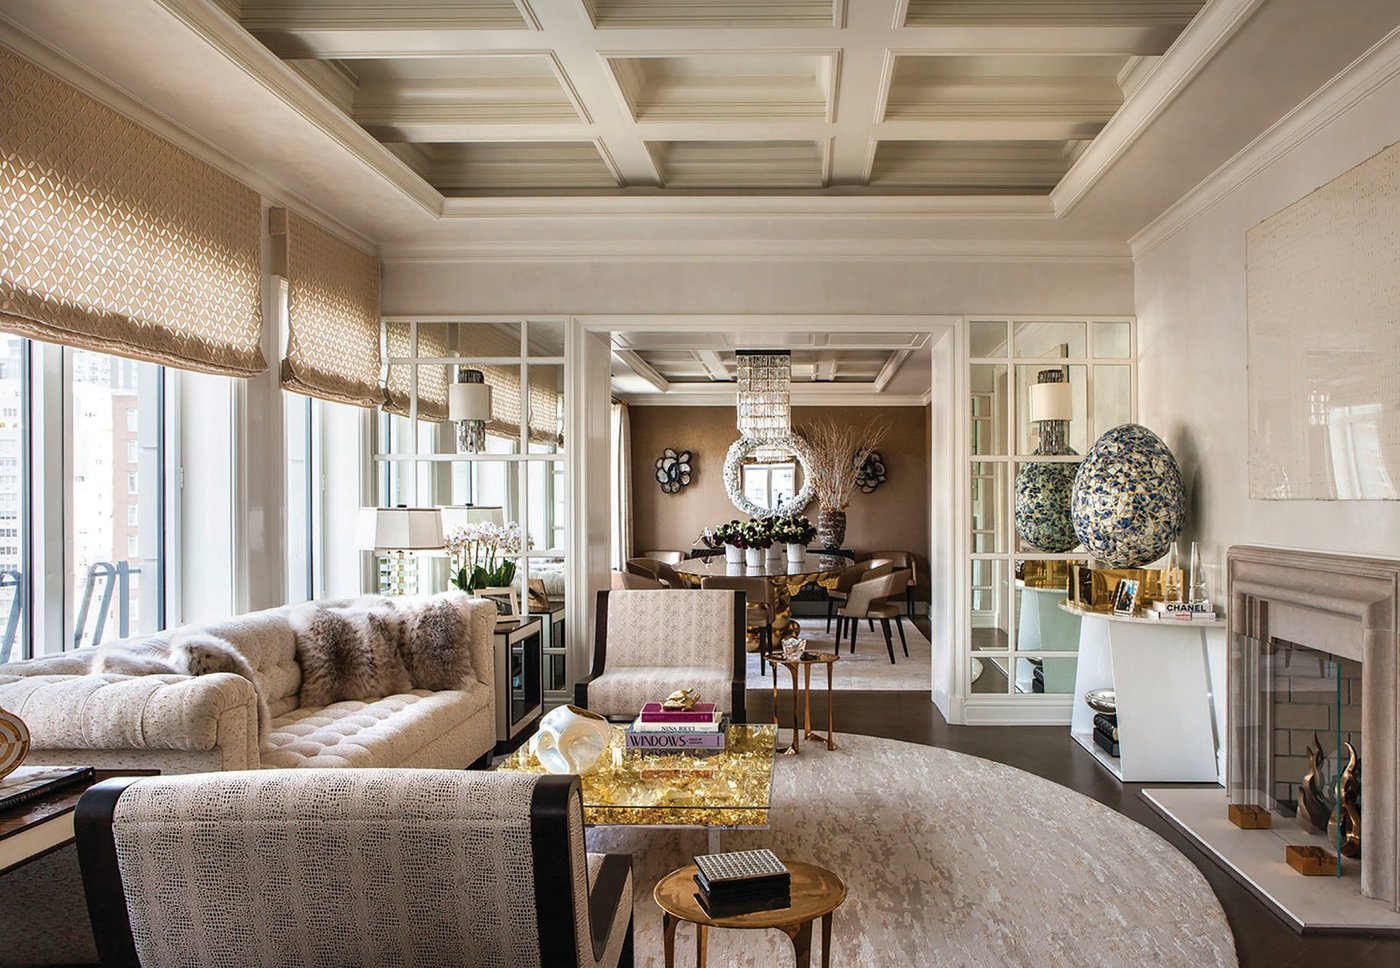 An Yves Klein coffee table and Wendell Castle chairs in the living room PHOTO COURTESY OF ARTHUR DUNNAM INTERIOR DESIGN